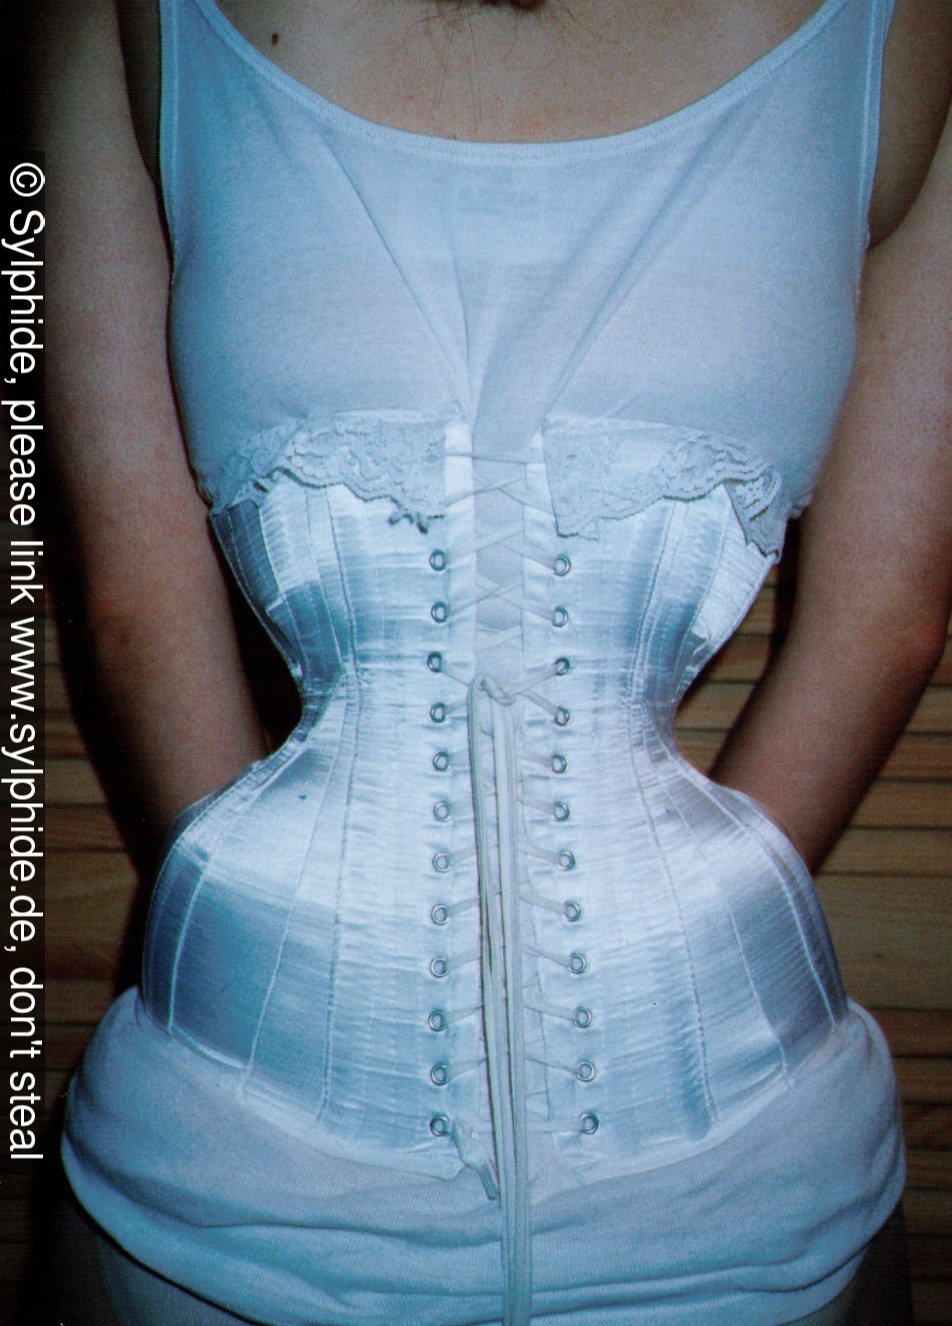 Altered satin corset from Vollers tight laced to 19 inch